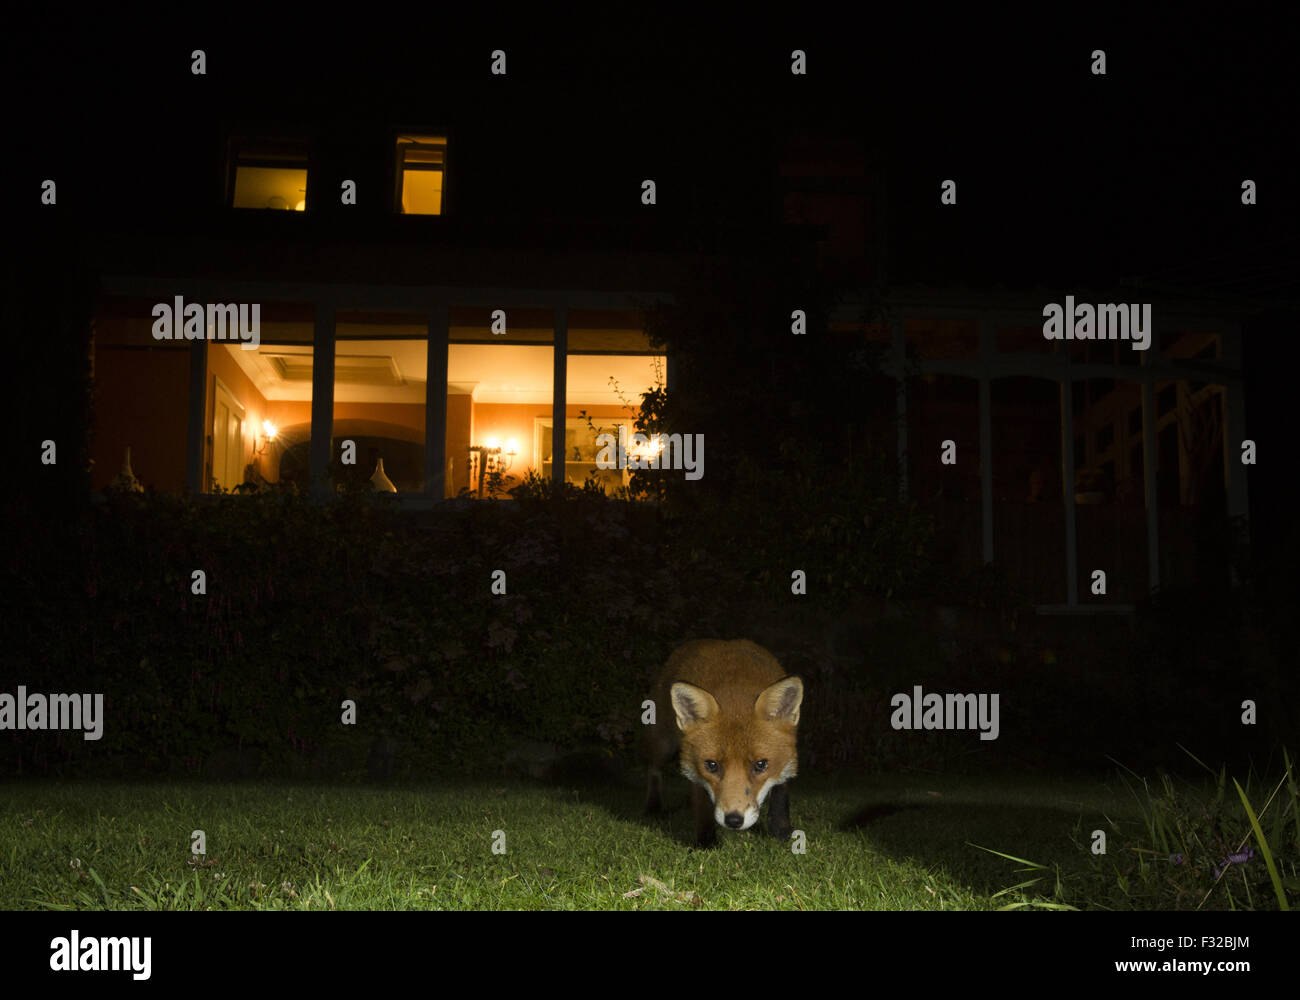 European Red Fox (Vulpes vulpes) adult, standing in garden at night, Sheffield, South Yorkshire, England, August Stock Photo